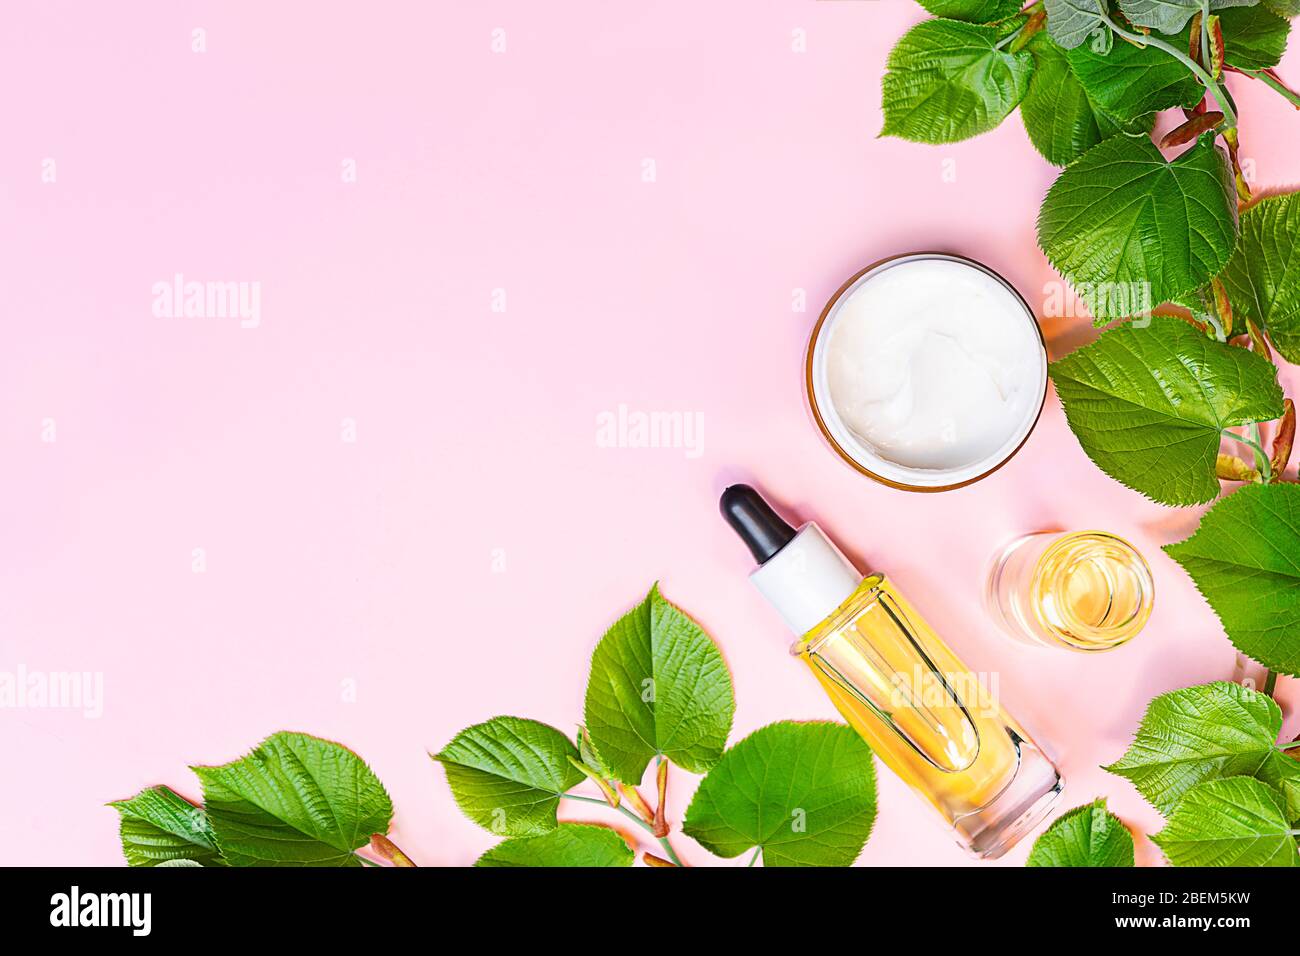 Skin care products, natural cosmetic. Flat lay image on pink background. Natural cosmetic skincare bottle, serum and organic green leaf. Homemade and beauty product concept. Stock Photo